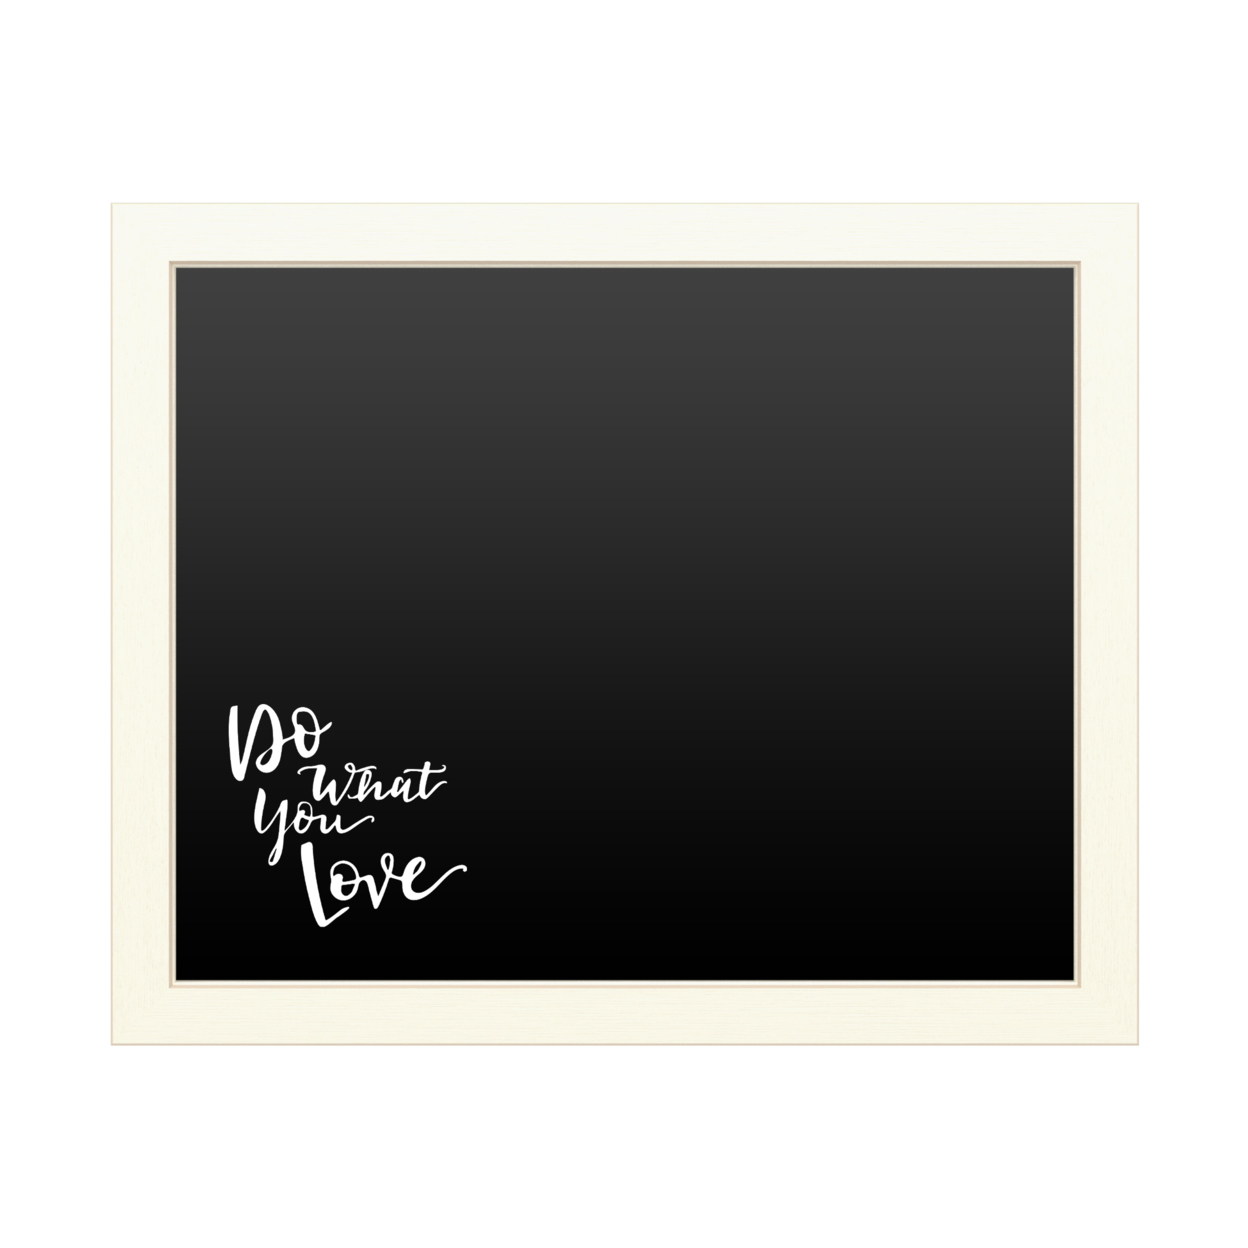 16 X 20 Chalk Board With Printed Artwork - Do What You Love White Board - Ready To Hang Chalkboard